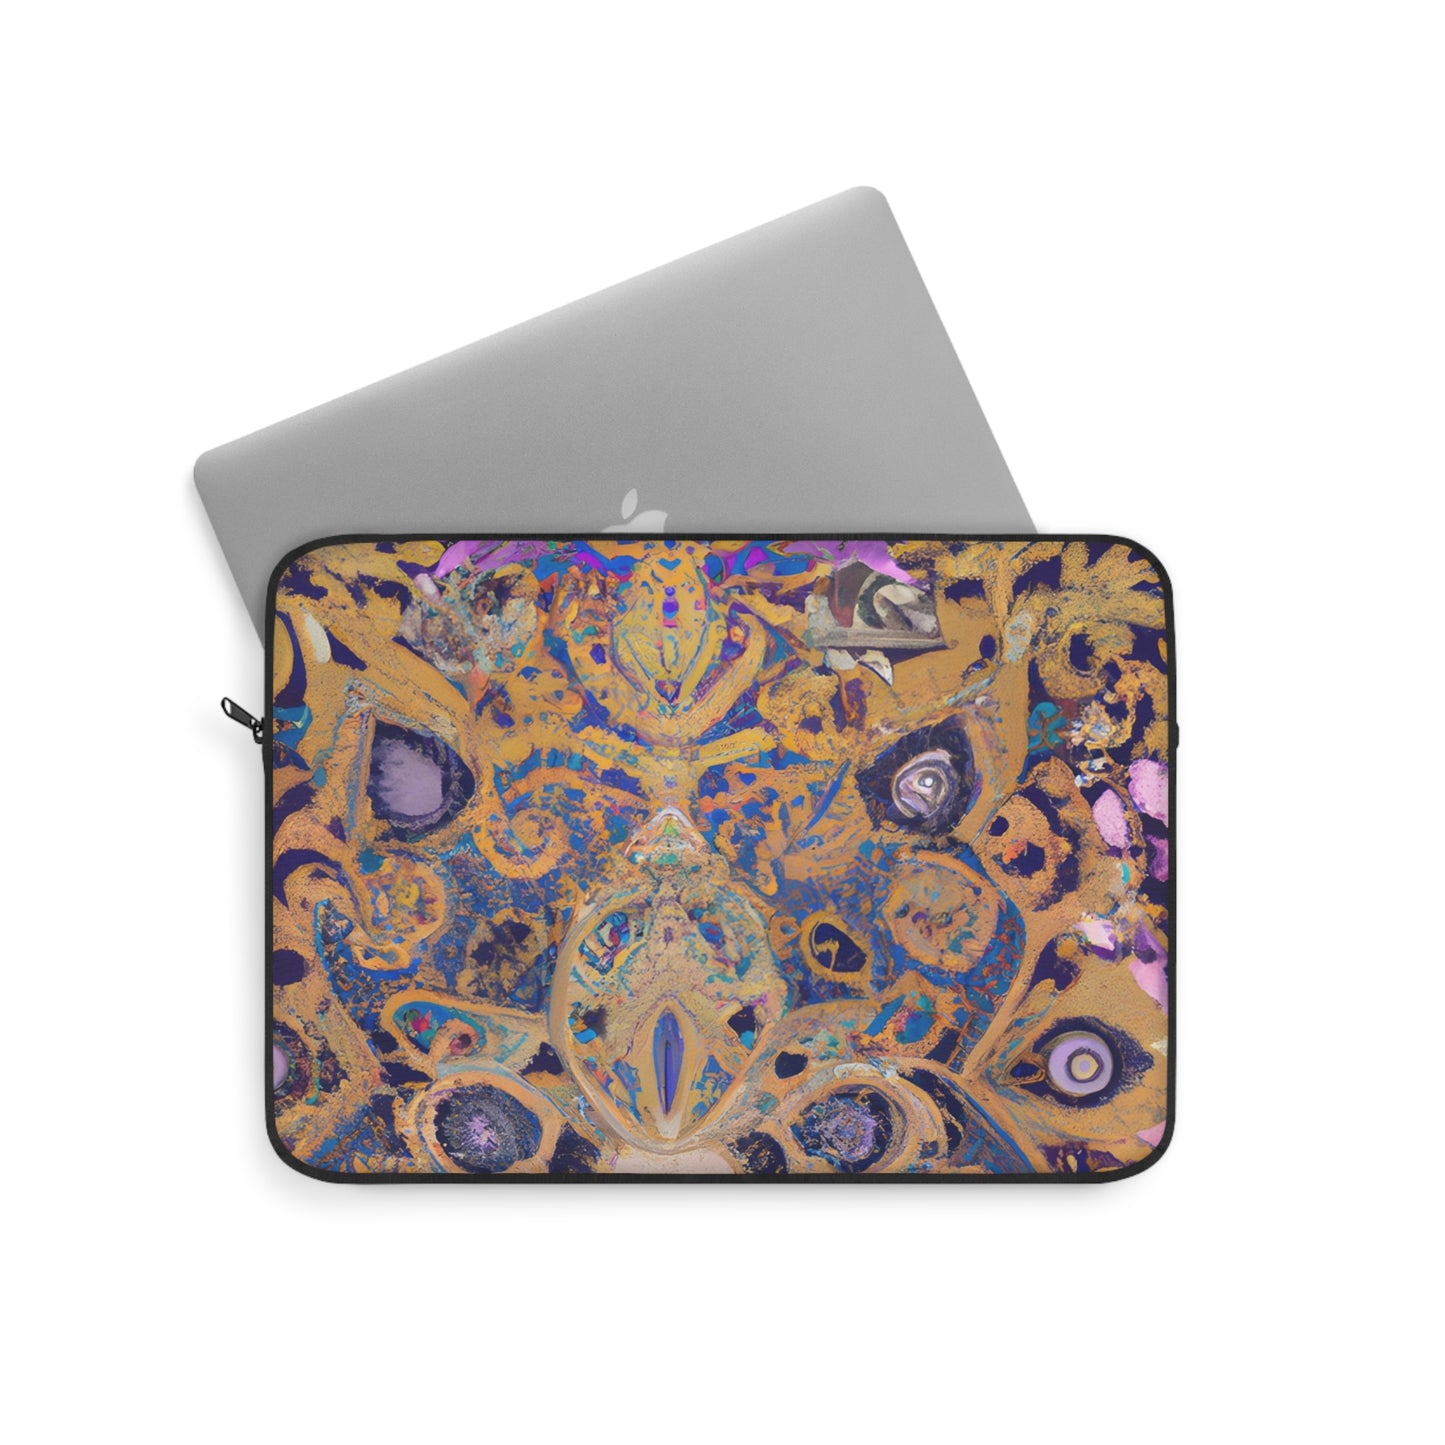 MarQuishaFlamers - Gay-Inspired Laptop Sleeve (12", 13", 15")